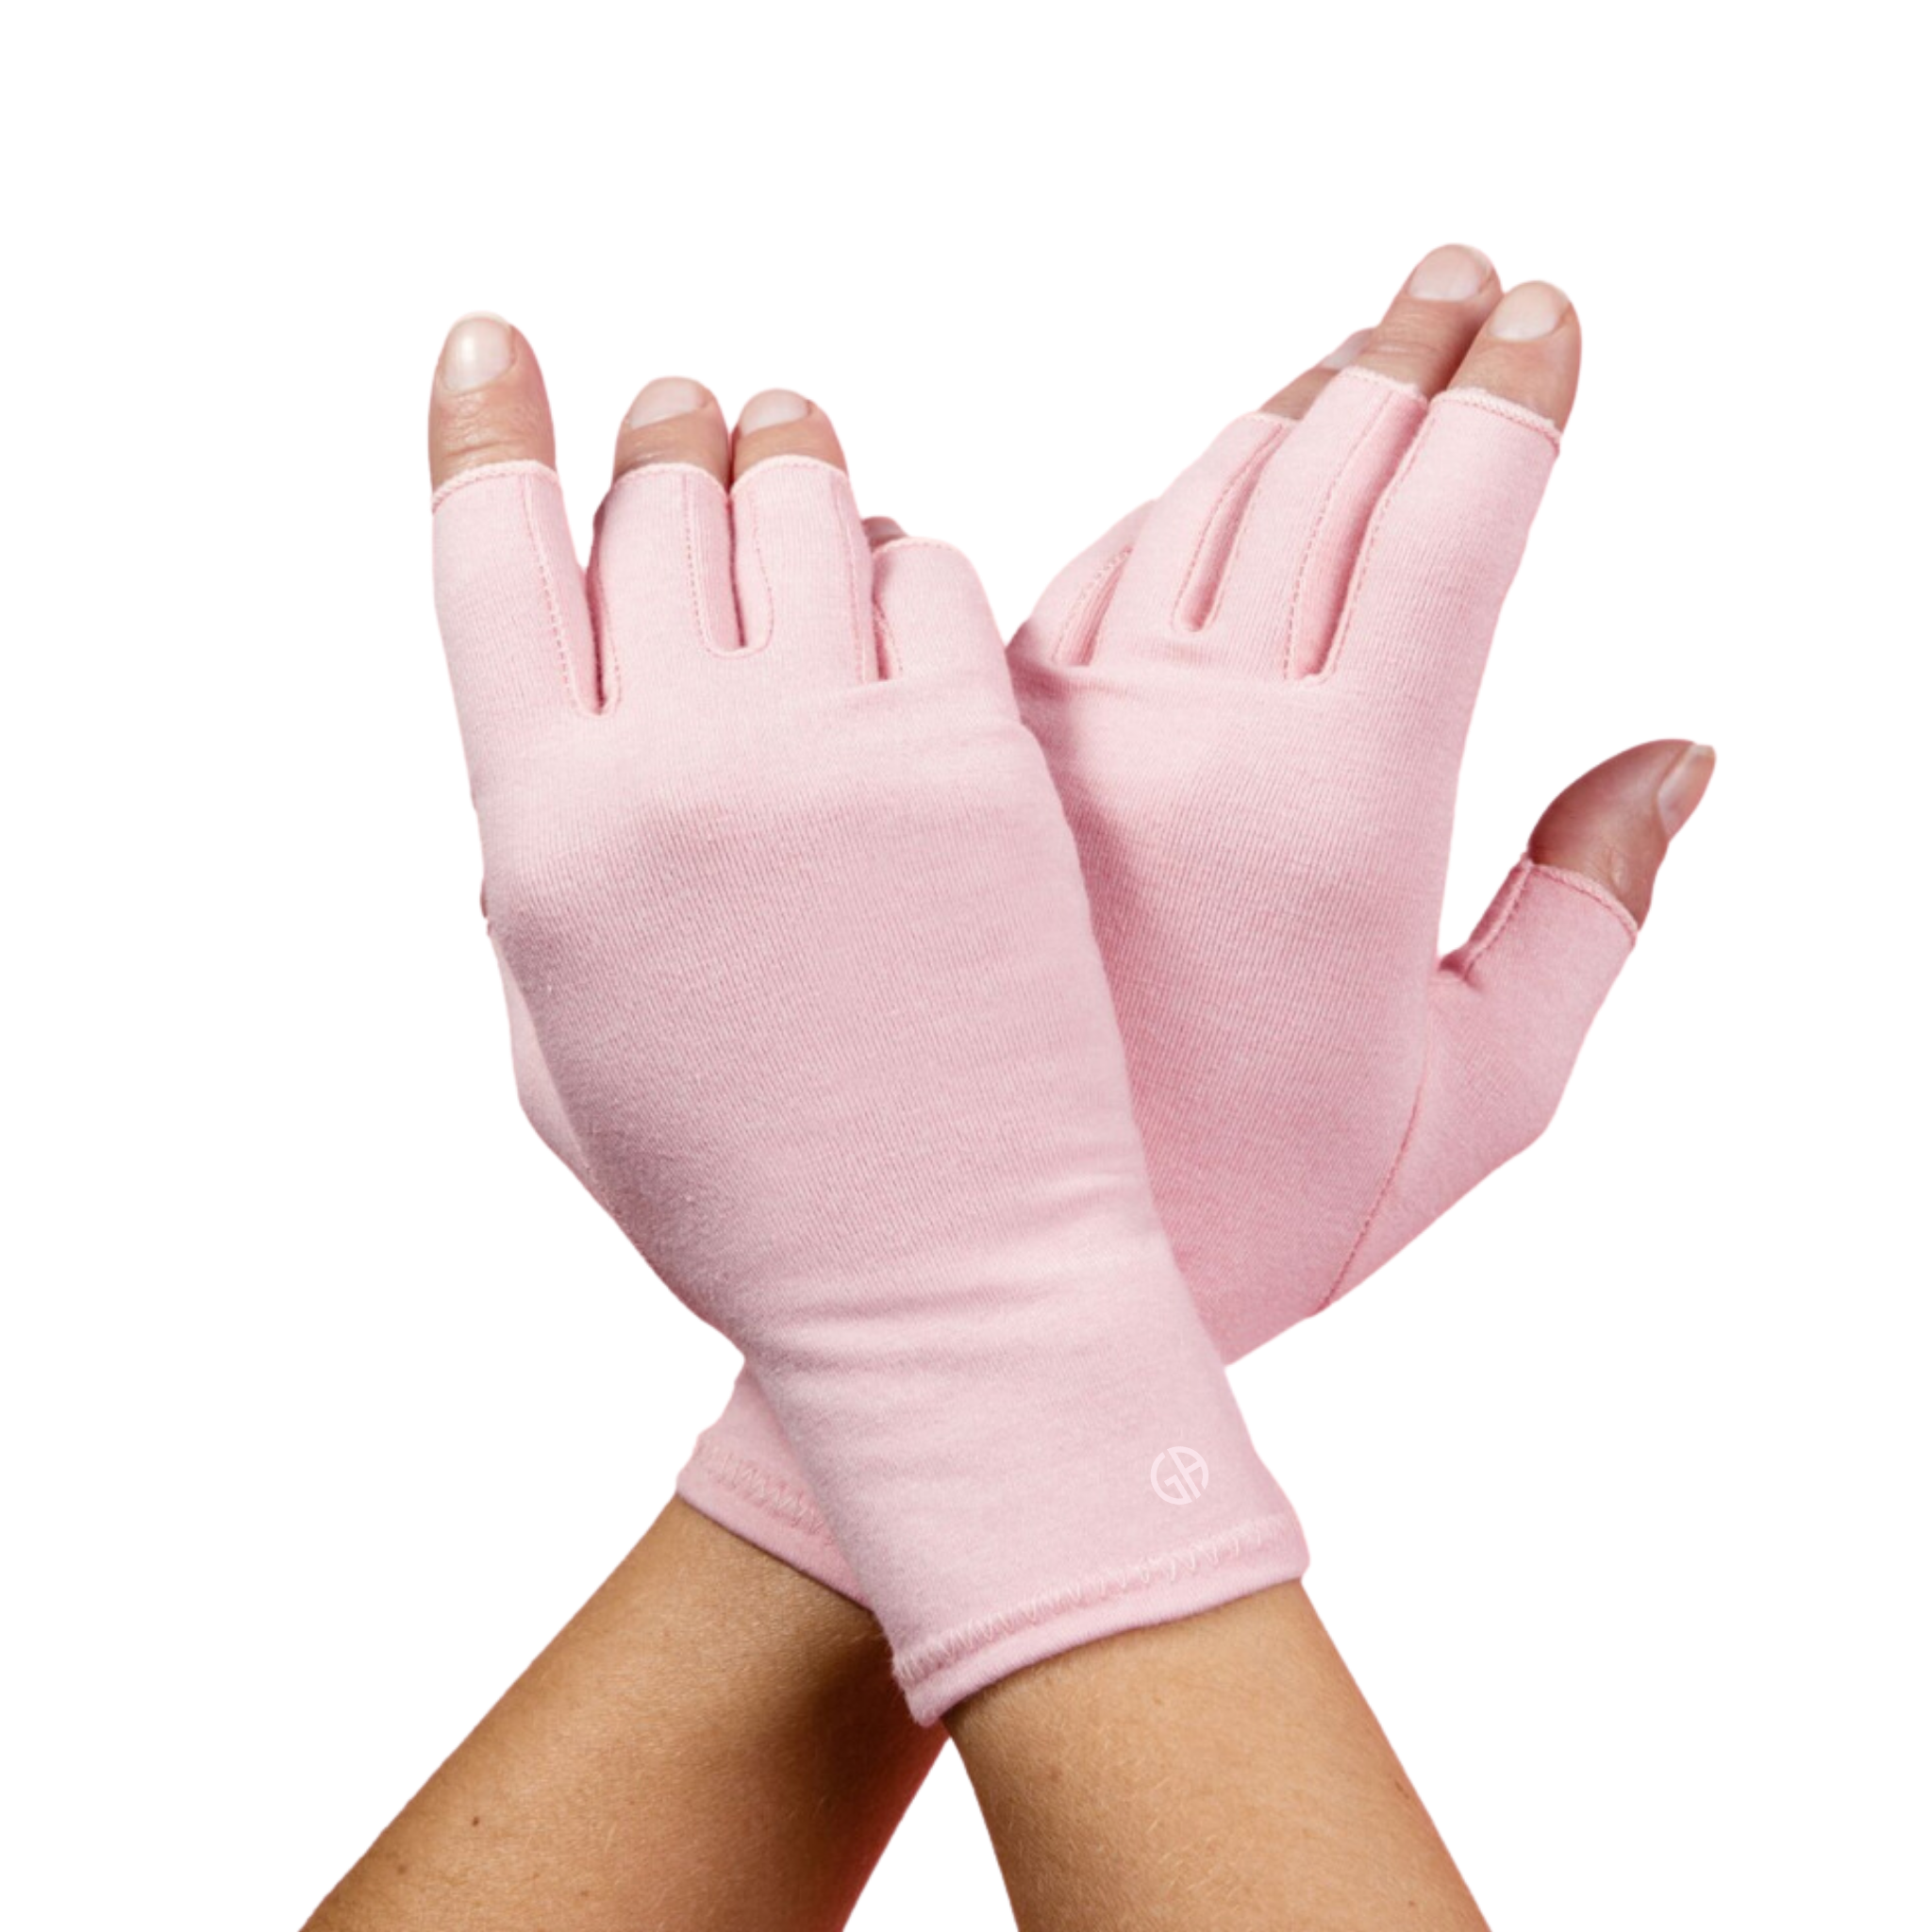 A pair of Ballet Pink Compression Gloves worn by a woman with arthritis, her hands crossed with palms facing down on a white background.